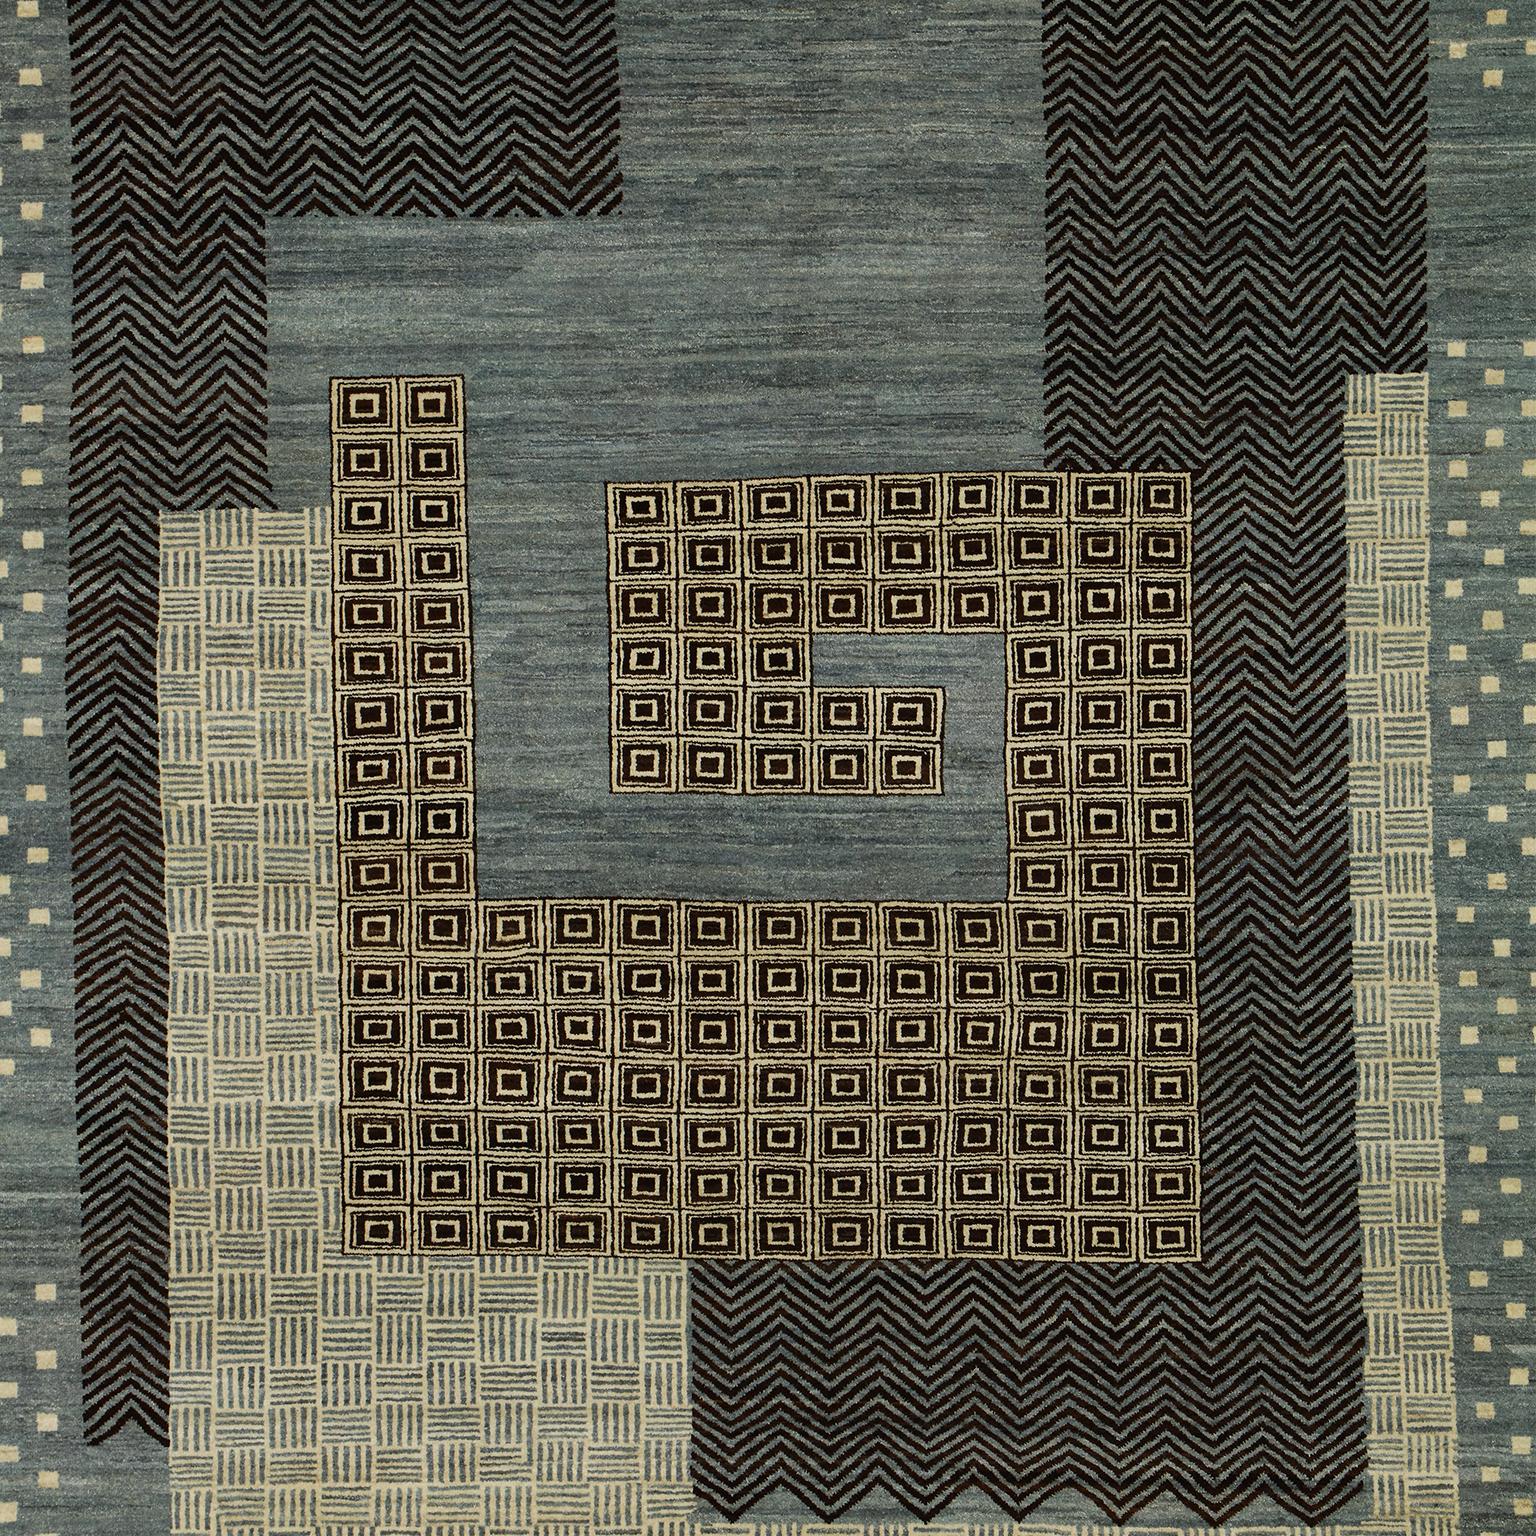 This blue, cream, gold, and black wool carpet with a modern architectural design, was woven using traditional weaving techniques from all-natural, hand-spun wool. Part of Orley Shabahang’s Architectural Collection, this piece titled “Labyrinth”